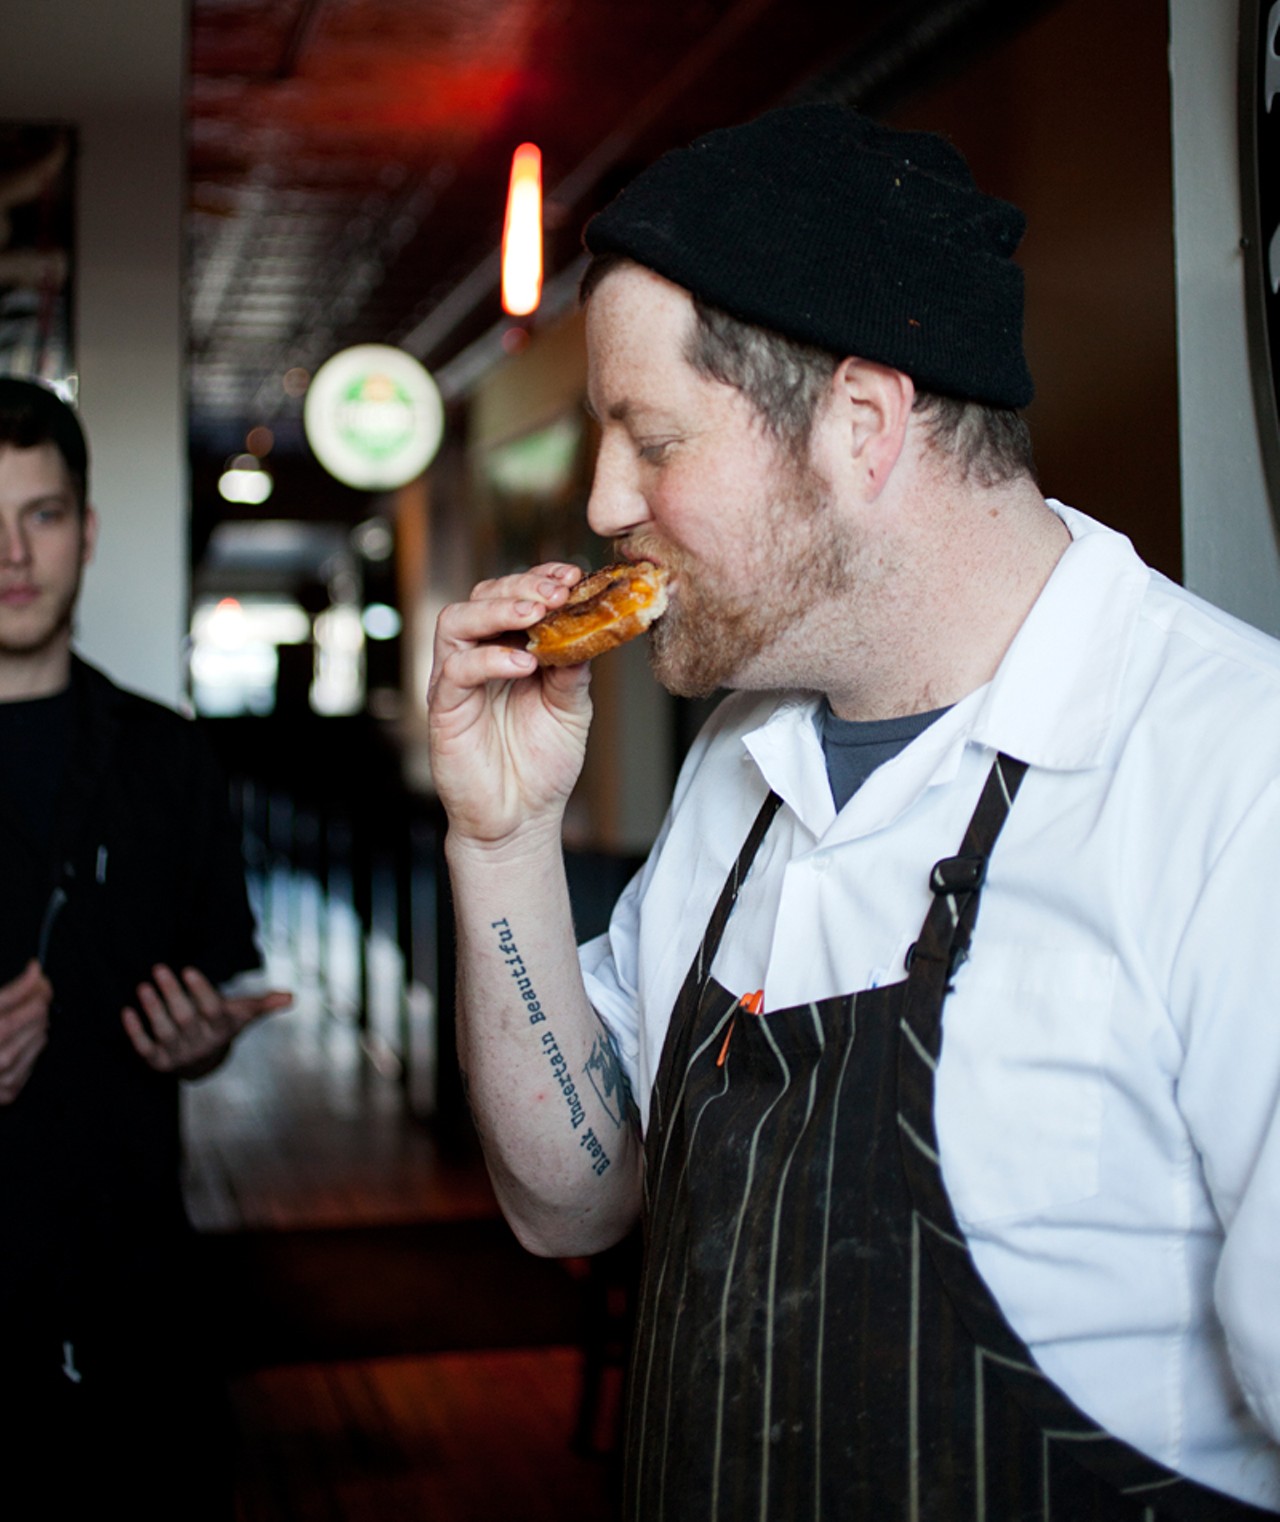 Executive Chef Jimmy Hippchen snacking on his grilled cheese sandwich.